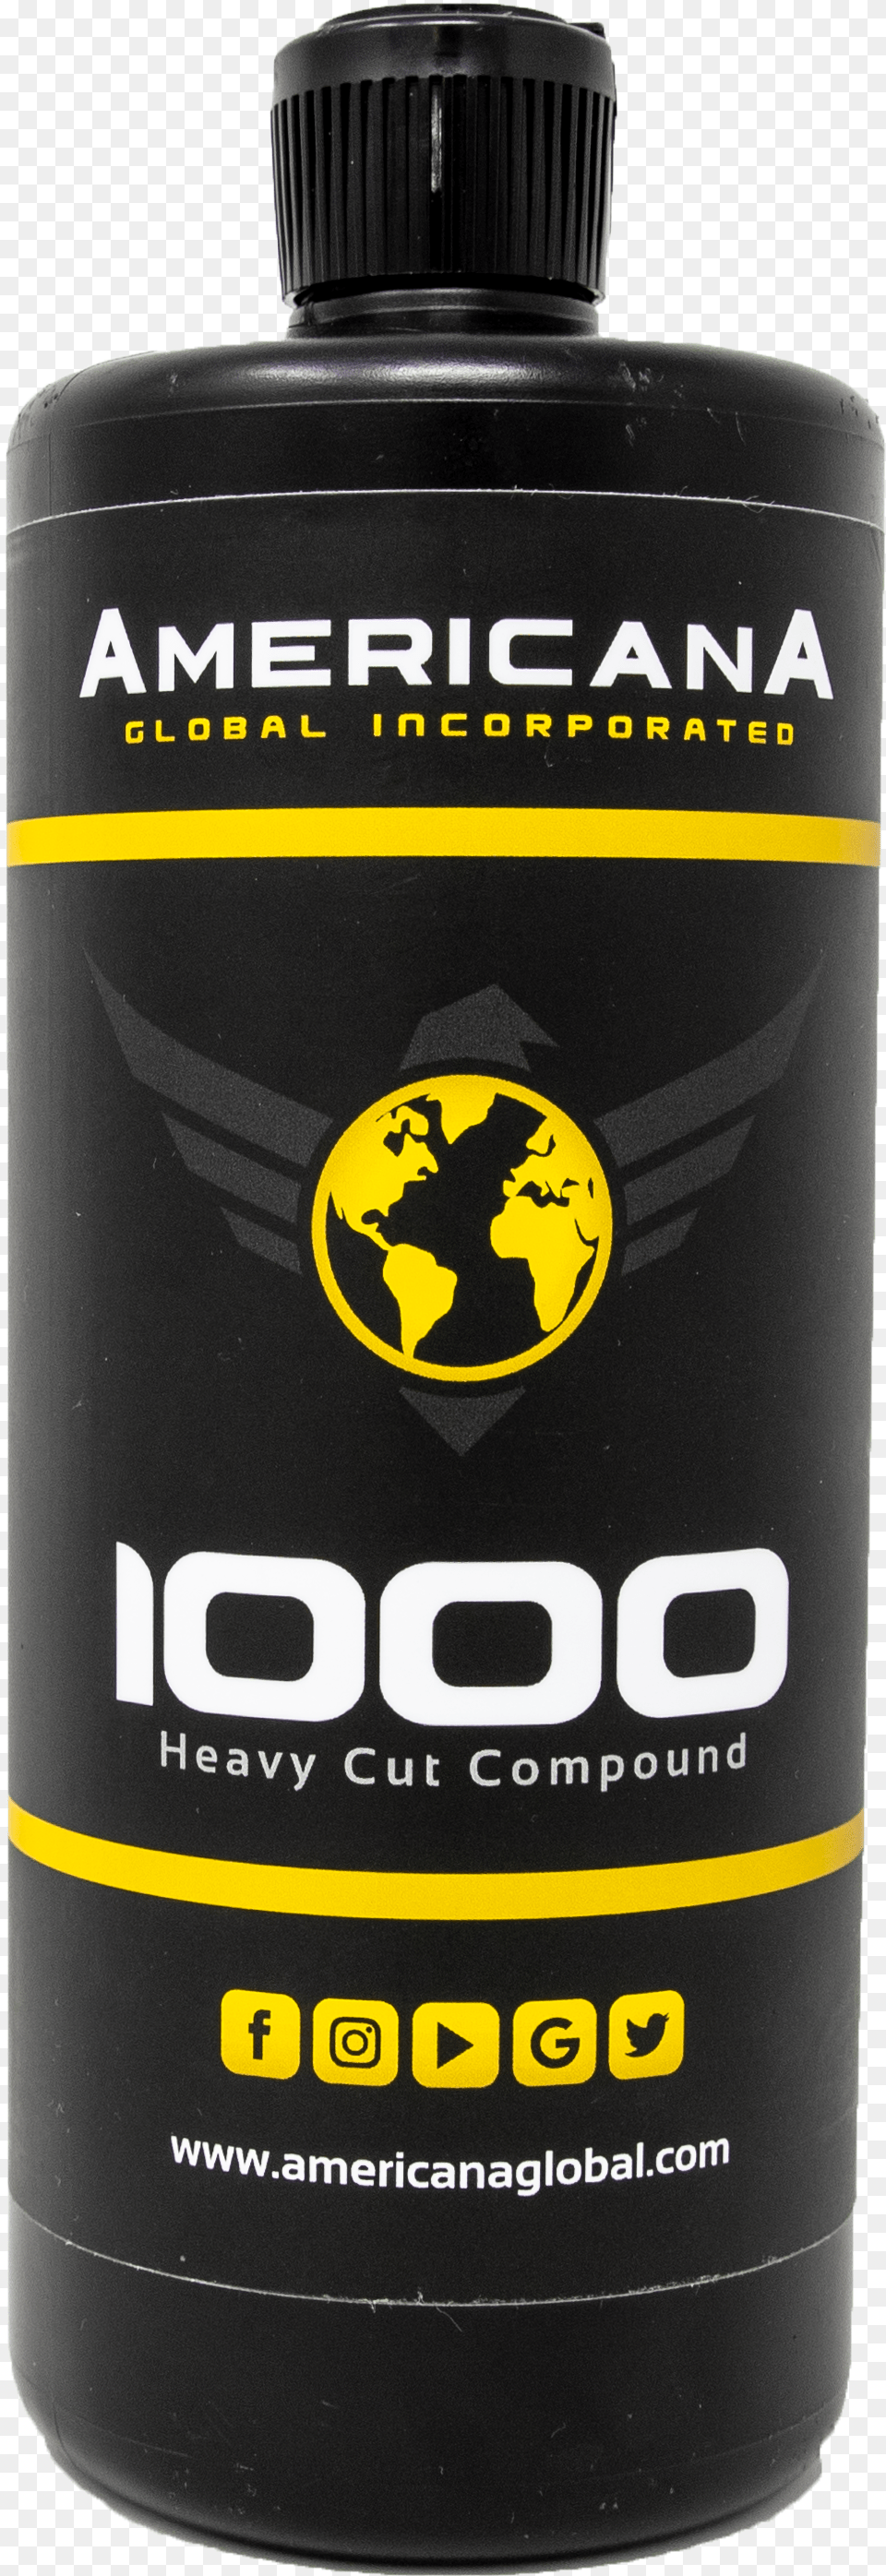 Americana 1000 Heavy Cut Compound, Bottle, Can, Tin Png Image